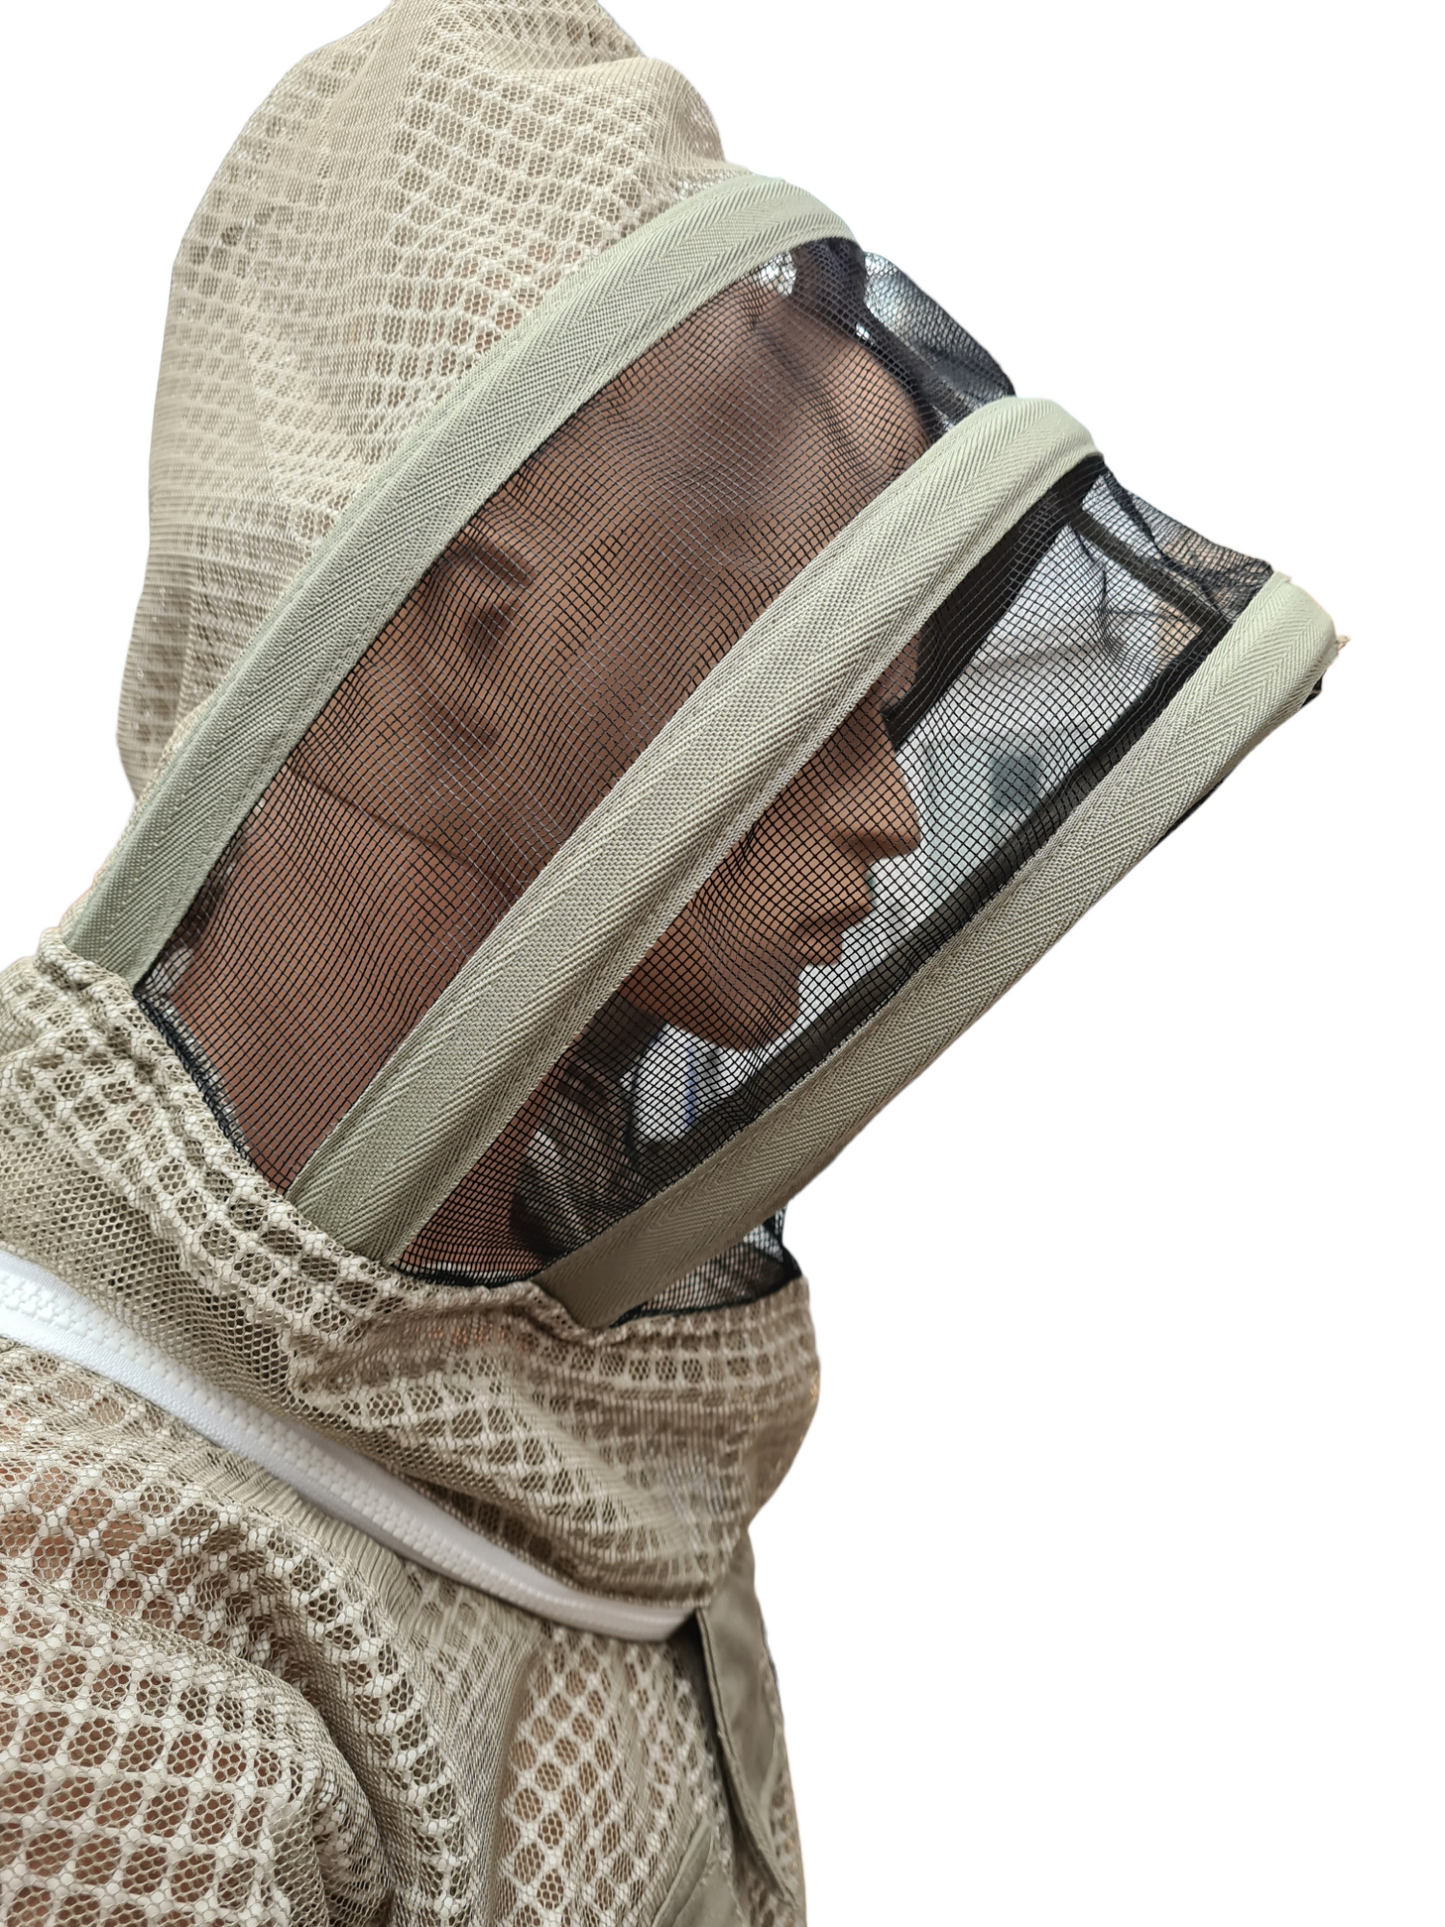 MBP Khaki Protection 3 Layer Bee Suit -